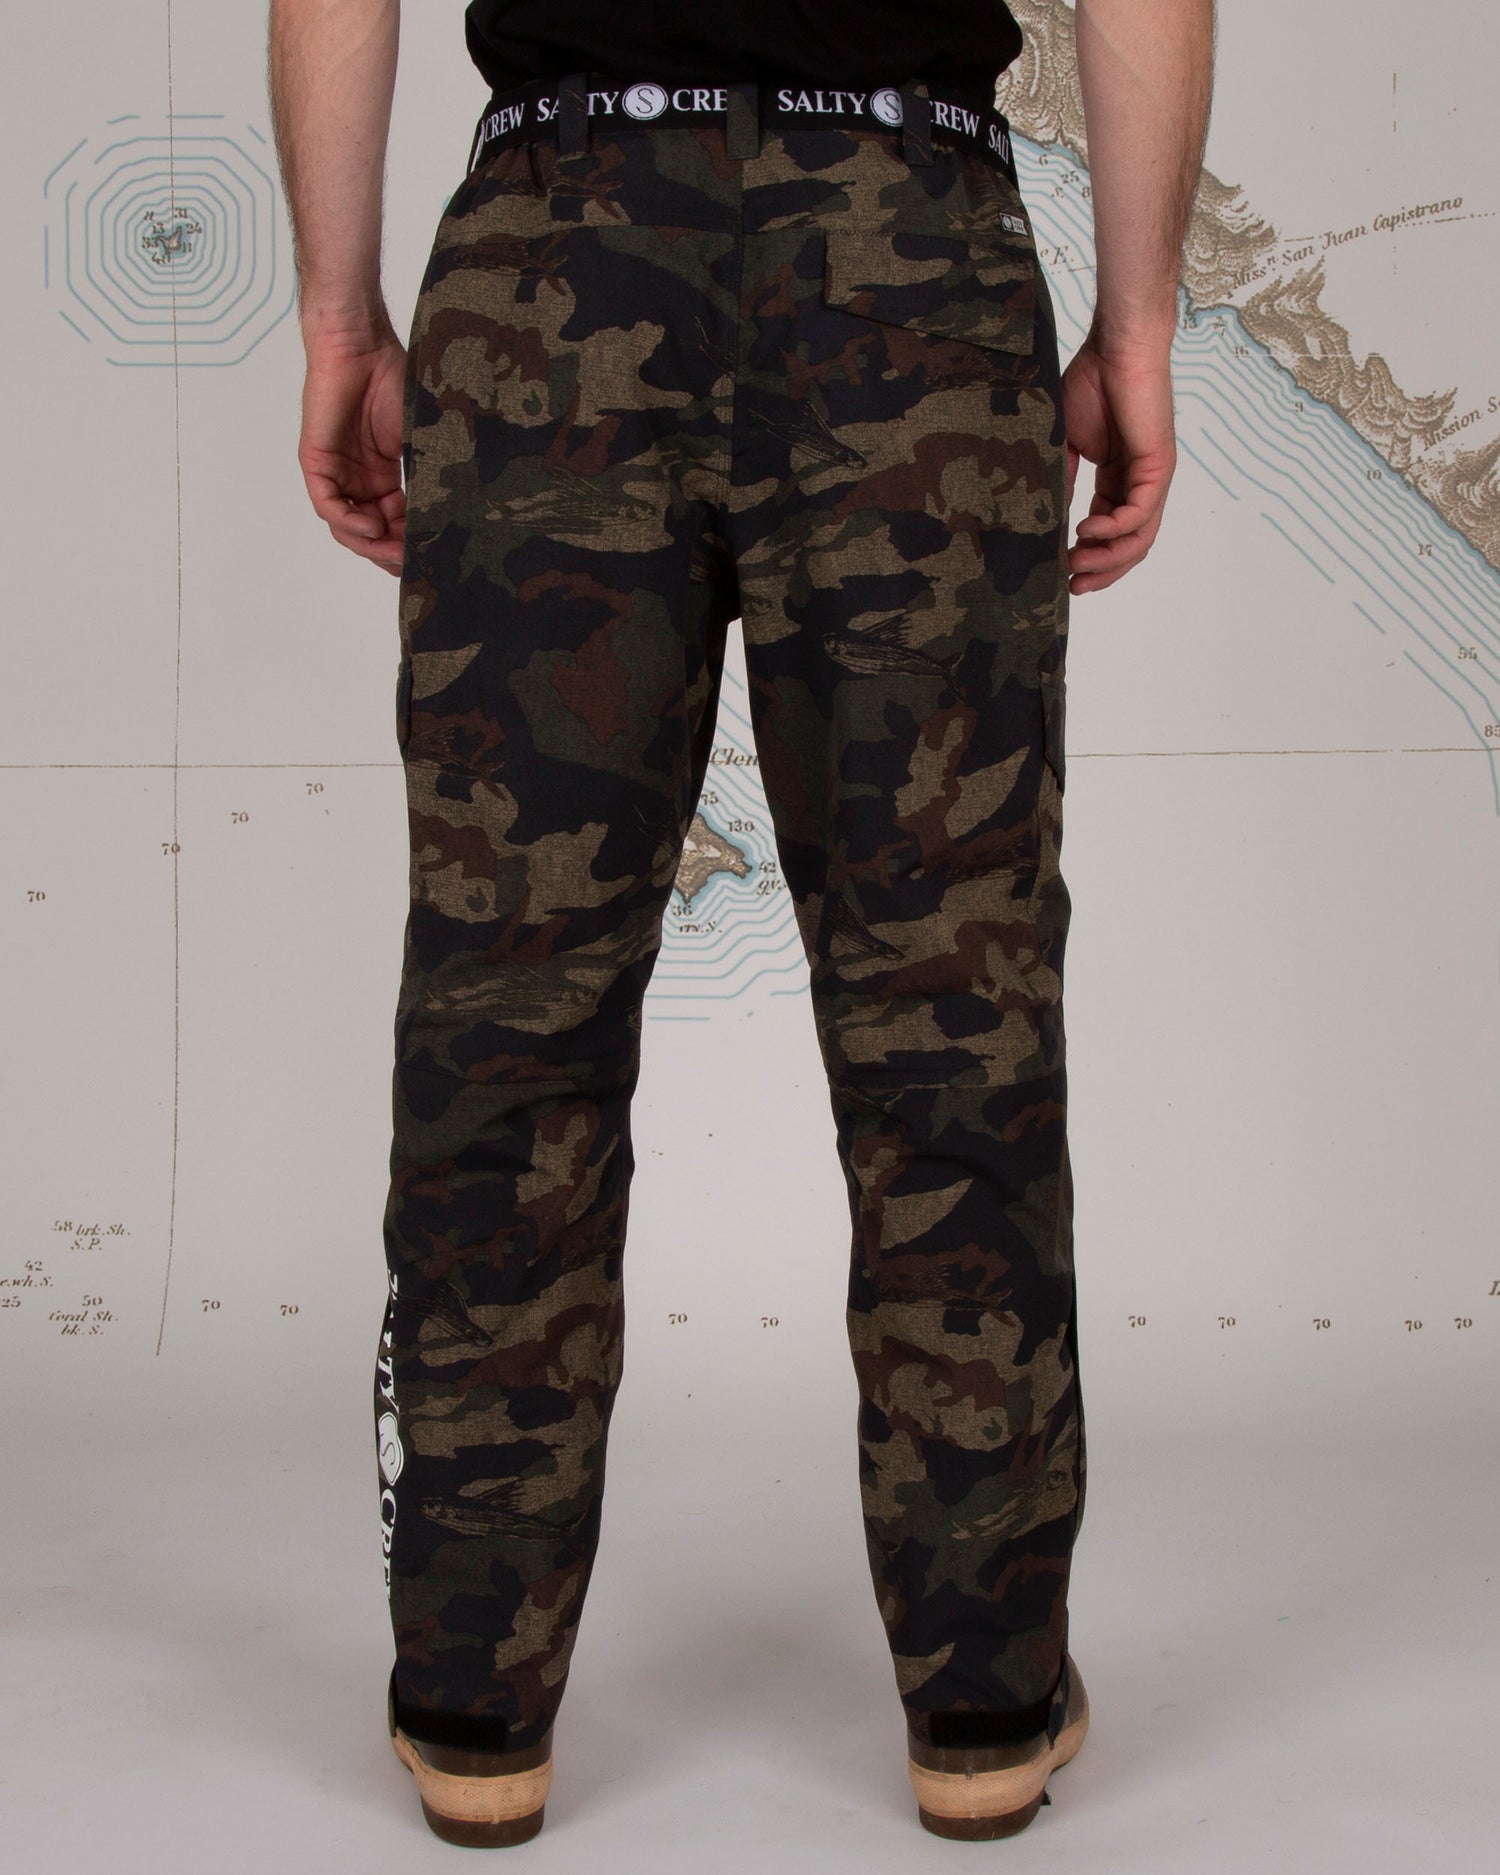 On body back of Pinnacle Camo Pant